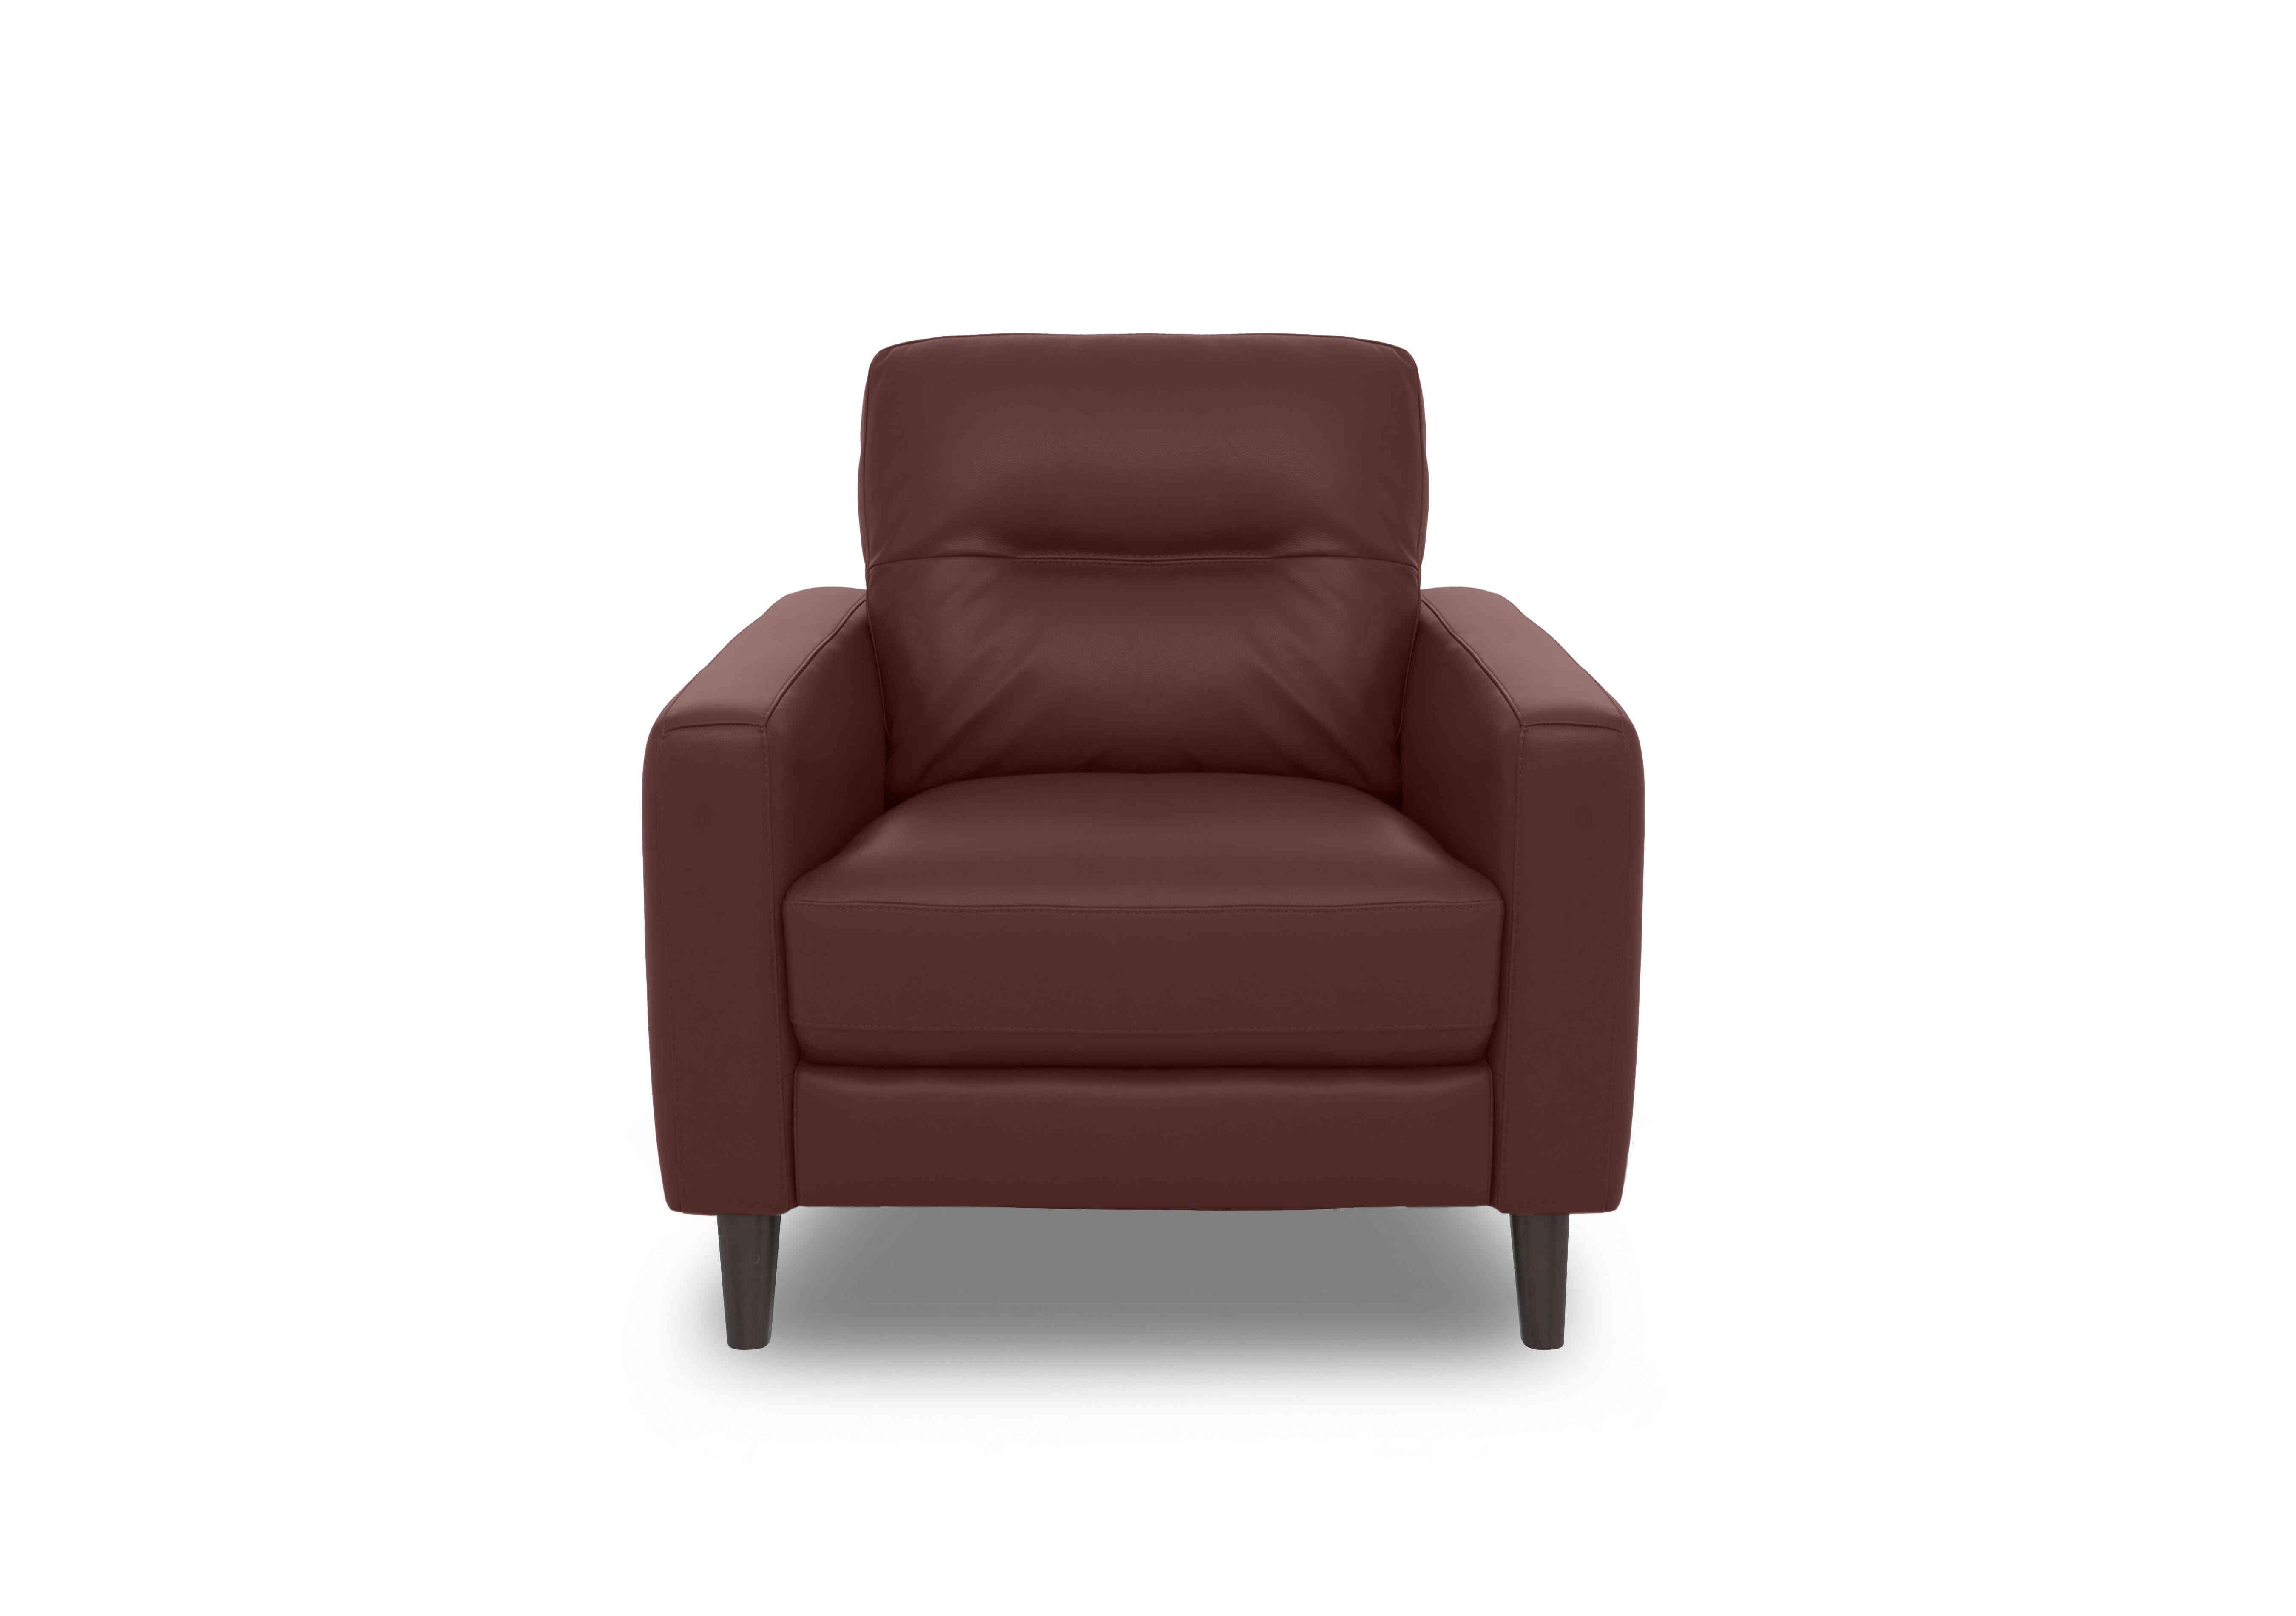 Jules Leather Chair in An-751b Burgundy on Furniture Village